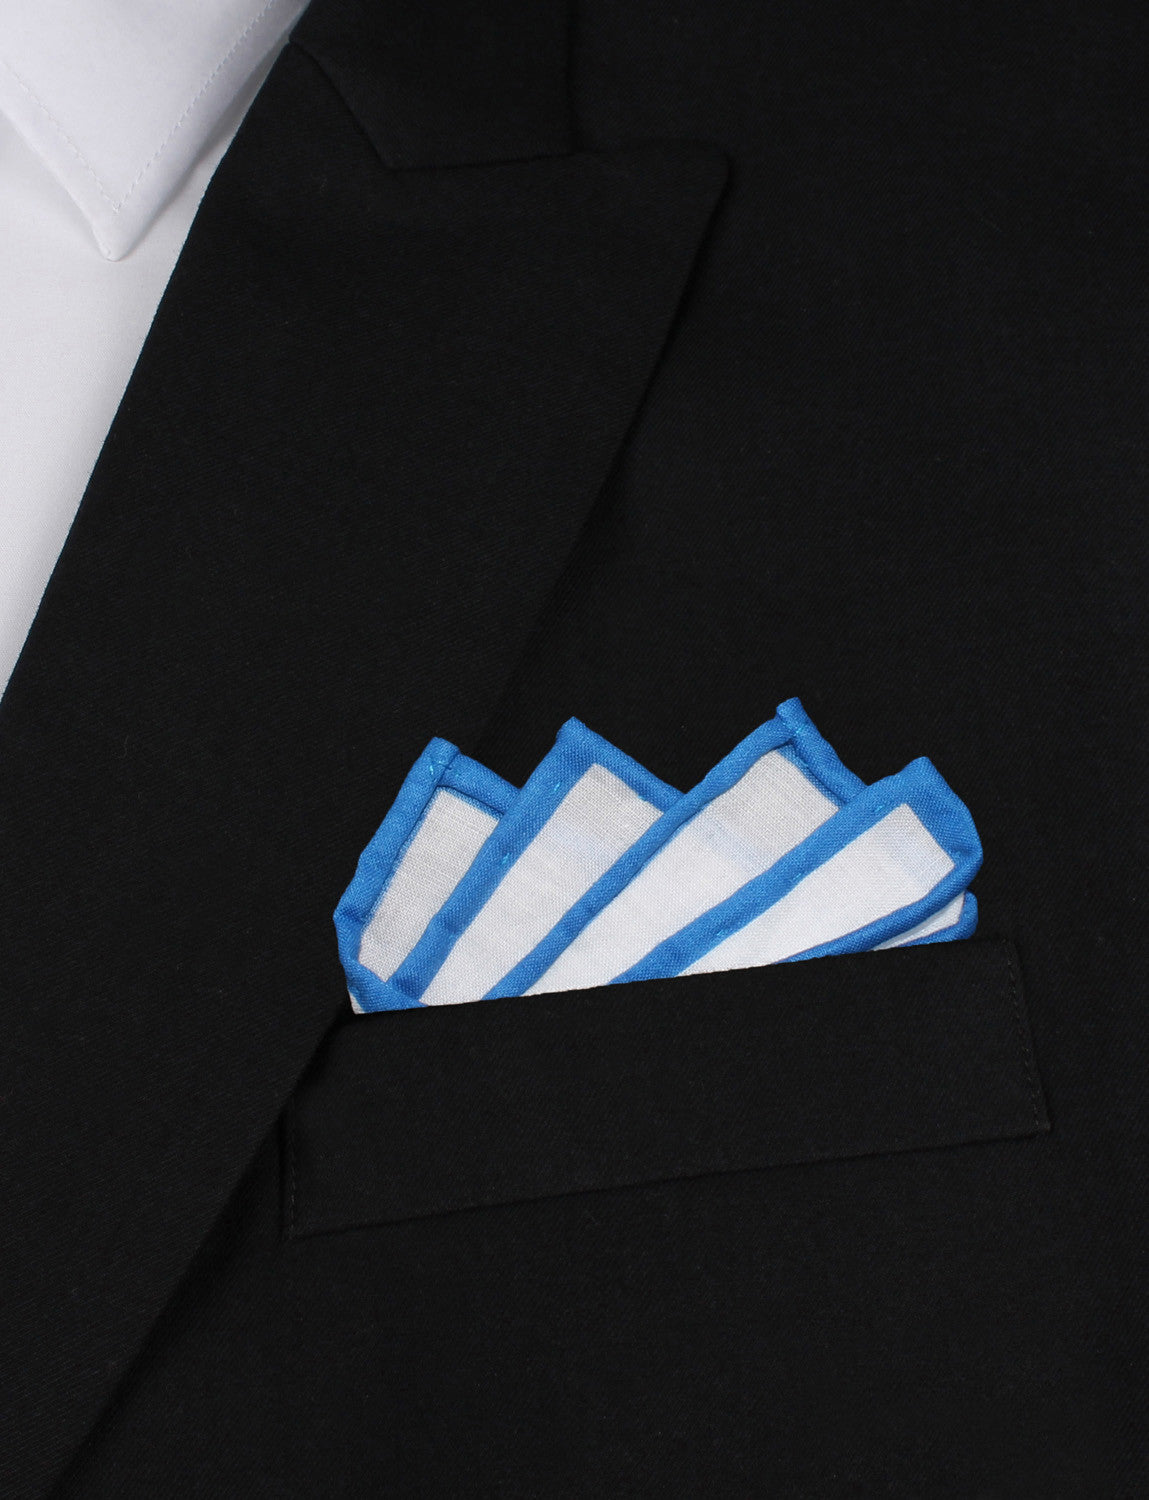 White Cotton Pocket Square with Blue Border Point Fold